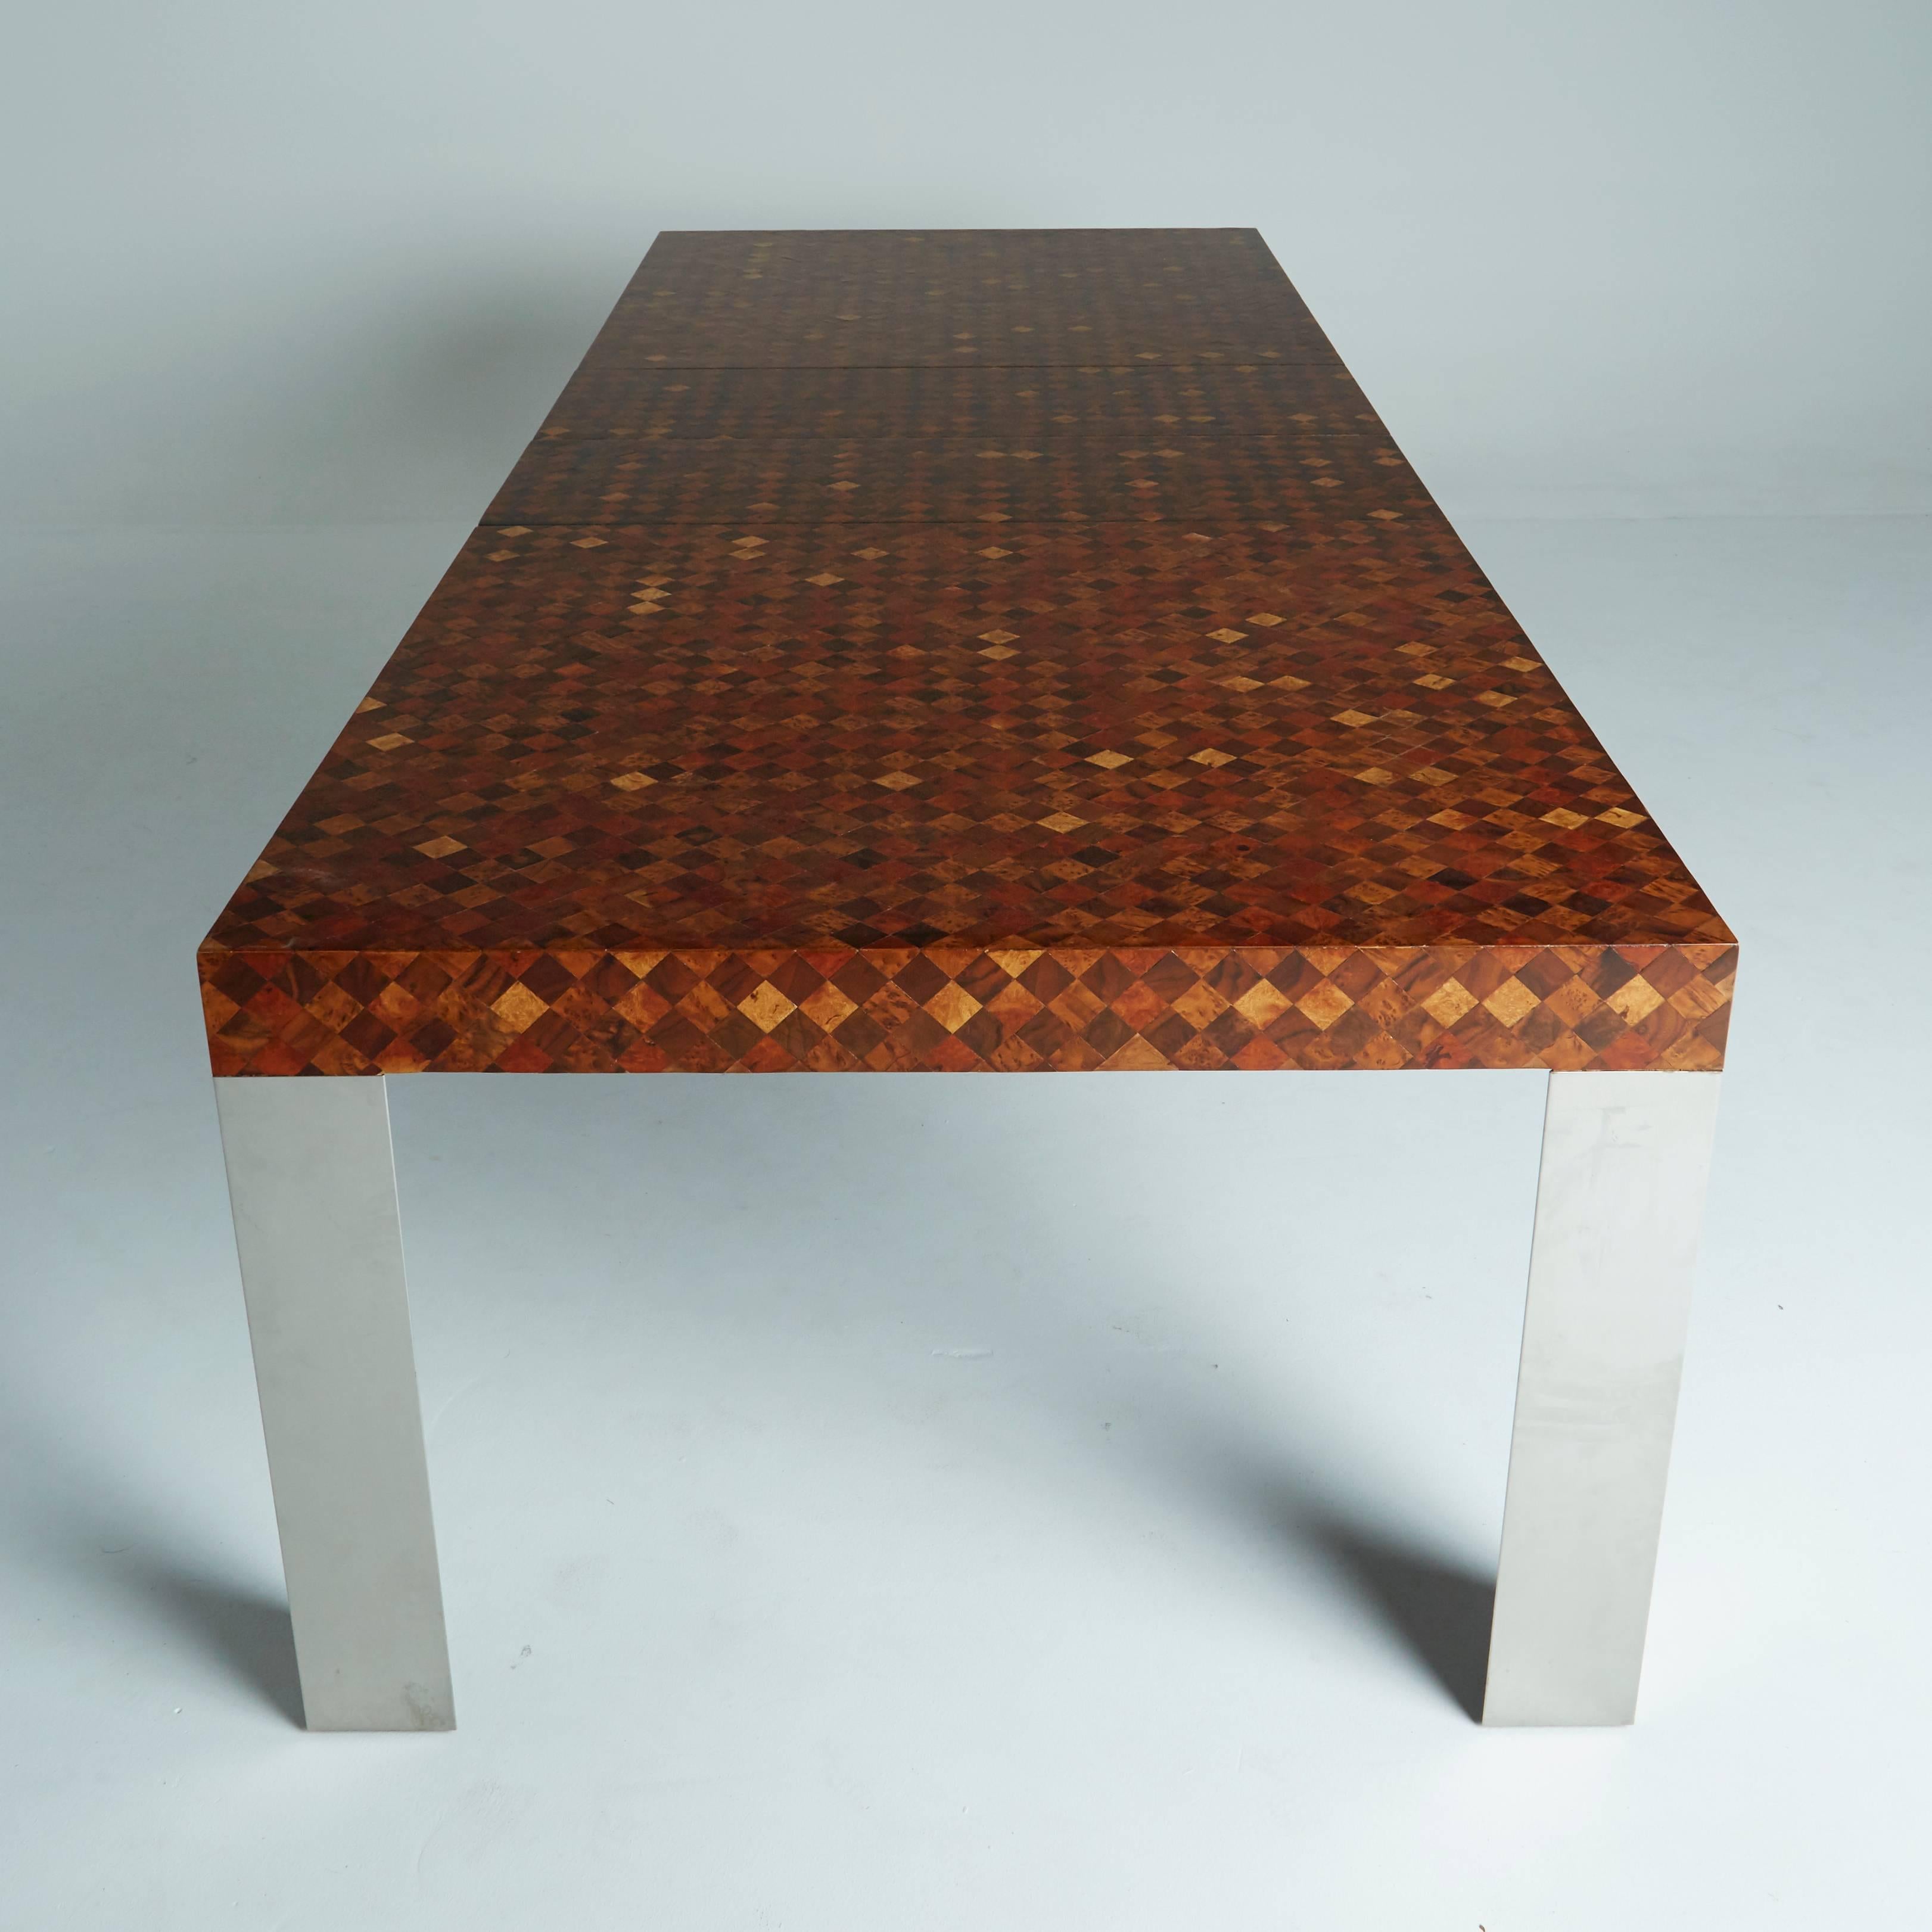 Designed, circa 1970 by Paul Evans for Directional, this distinct table is a remarkable and rare find. An alluring, patchwork tabletop with a checkered collage of exotic woods sits on top of four triangular chrome legs. Two 15